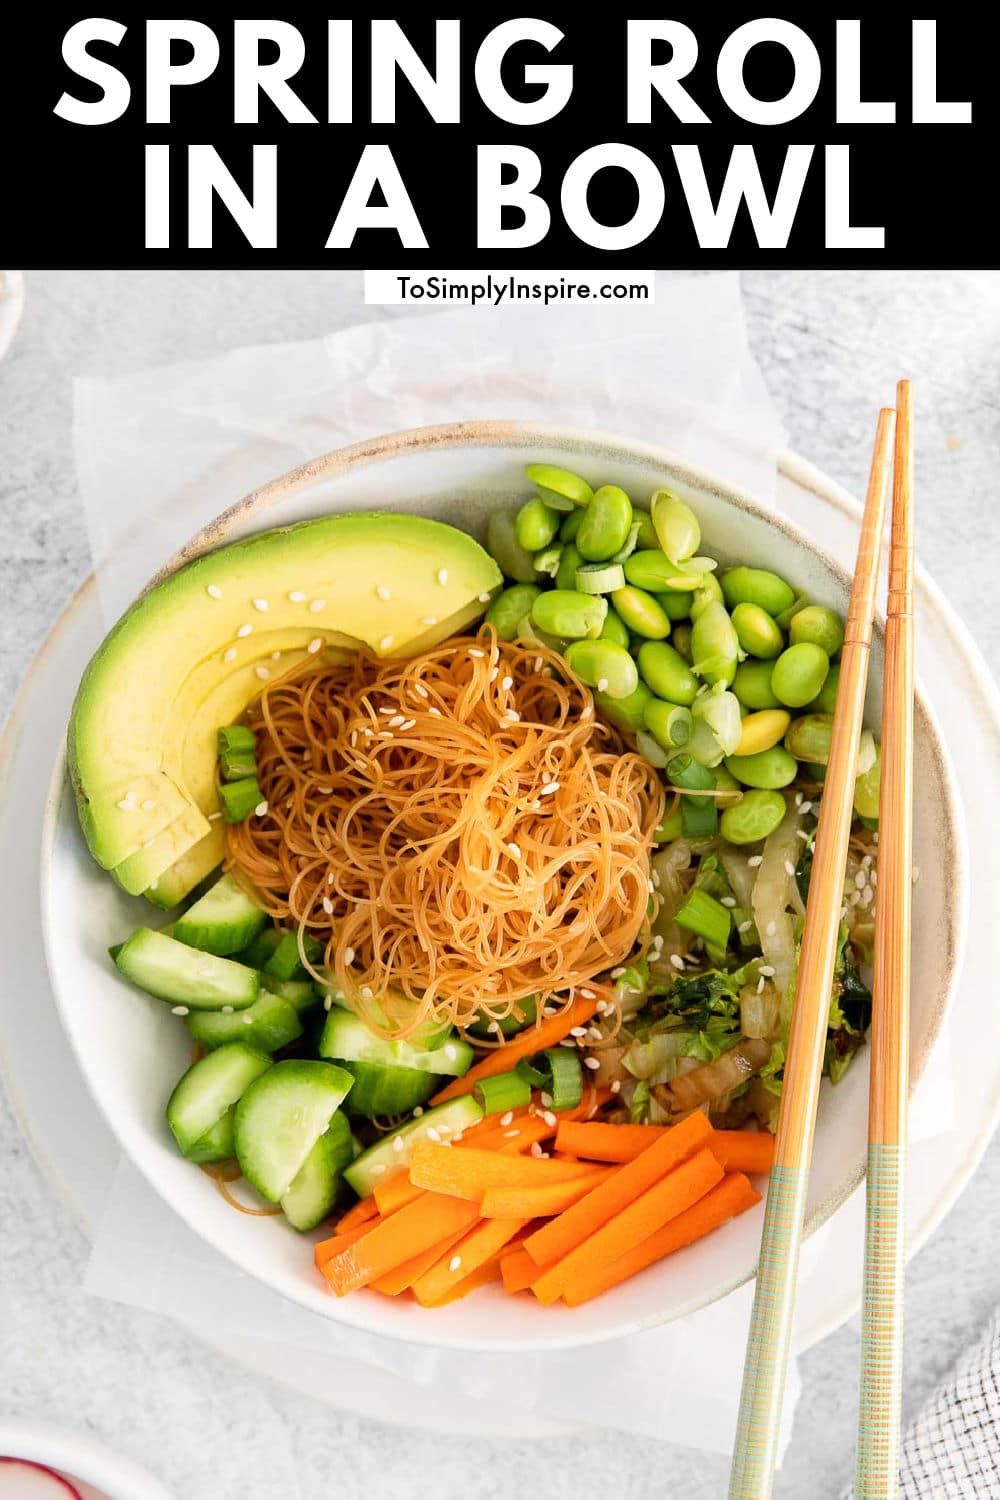 Spring Roll in a Bowl - To Simply Inspire